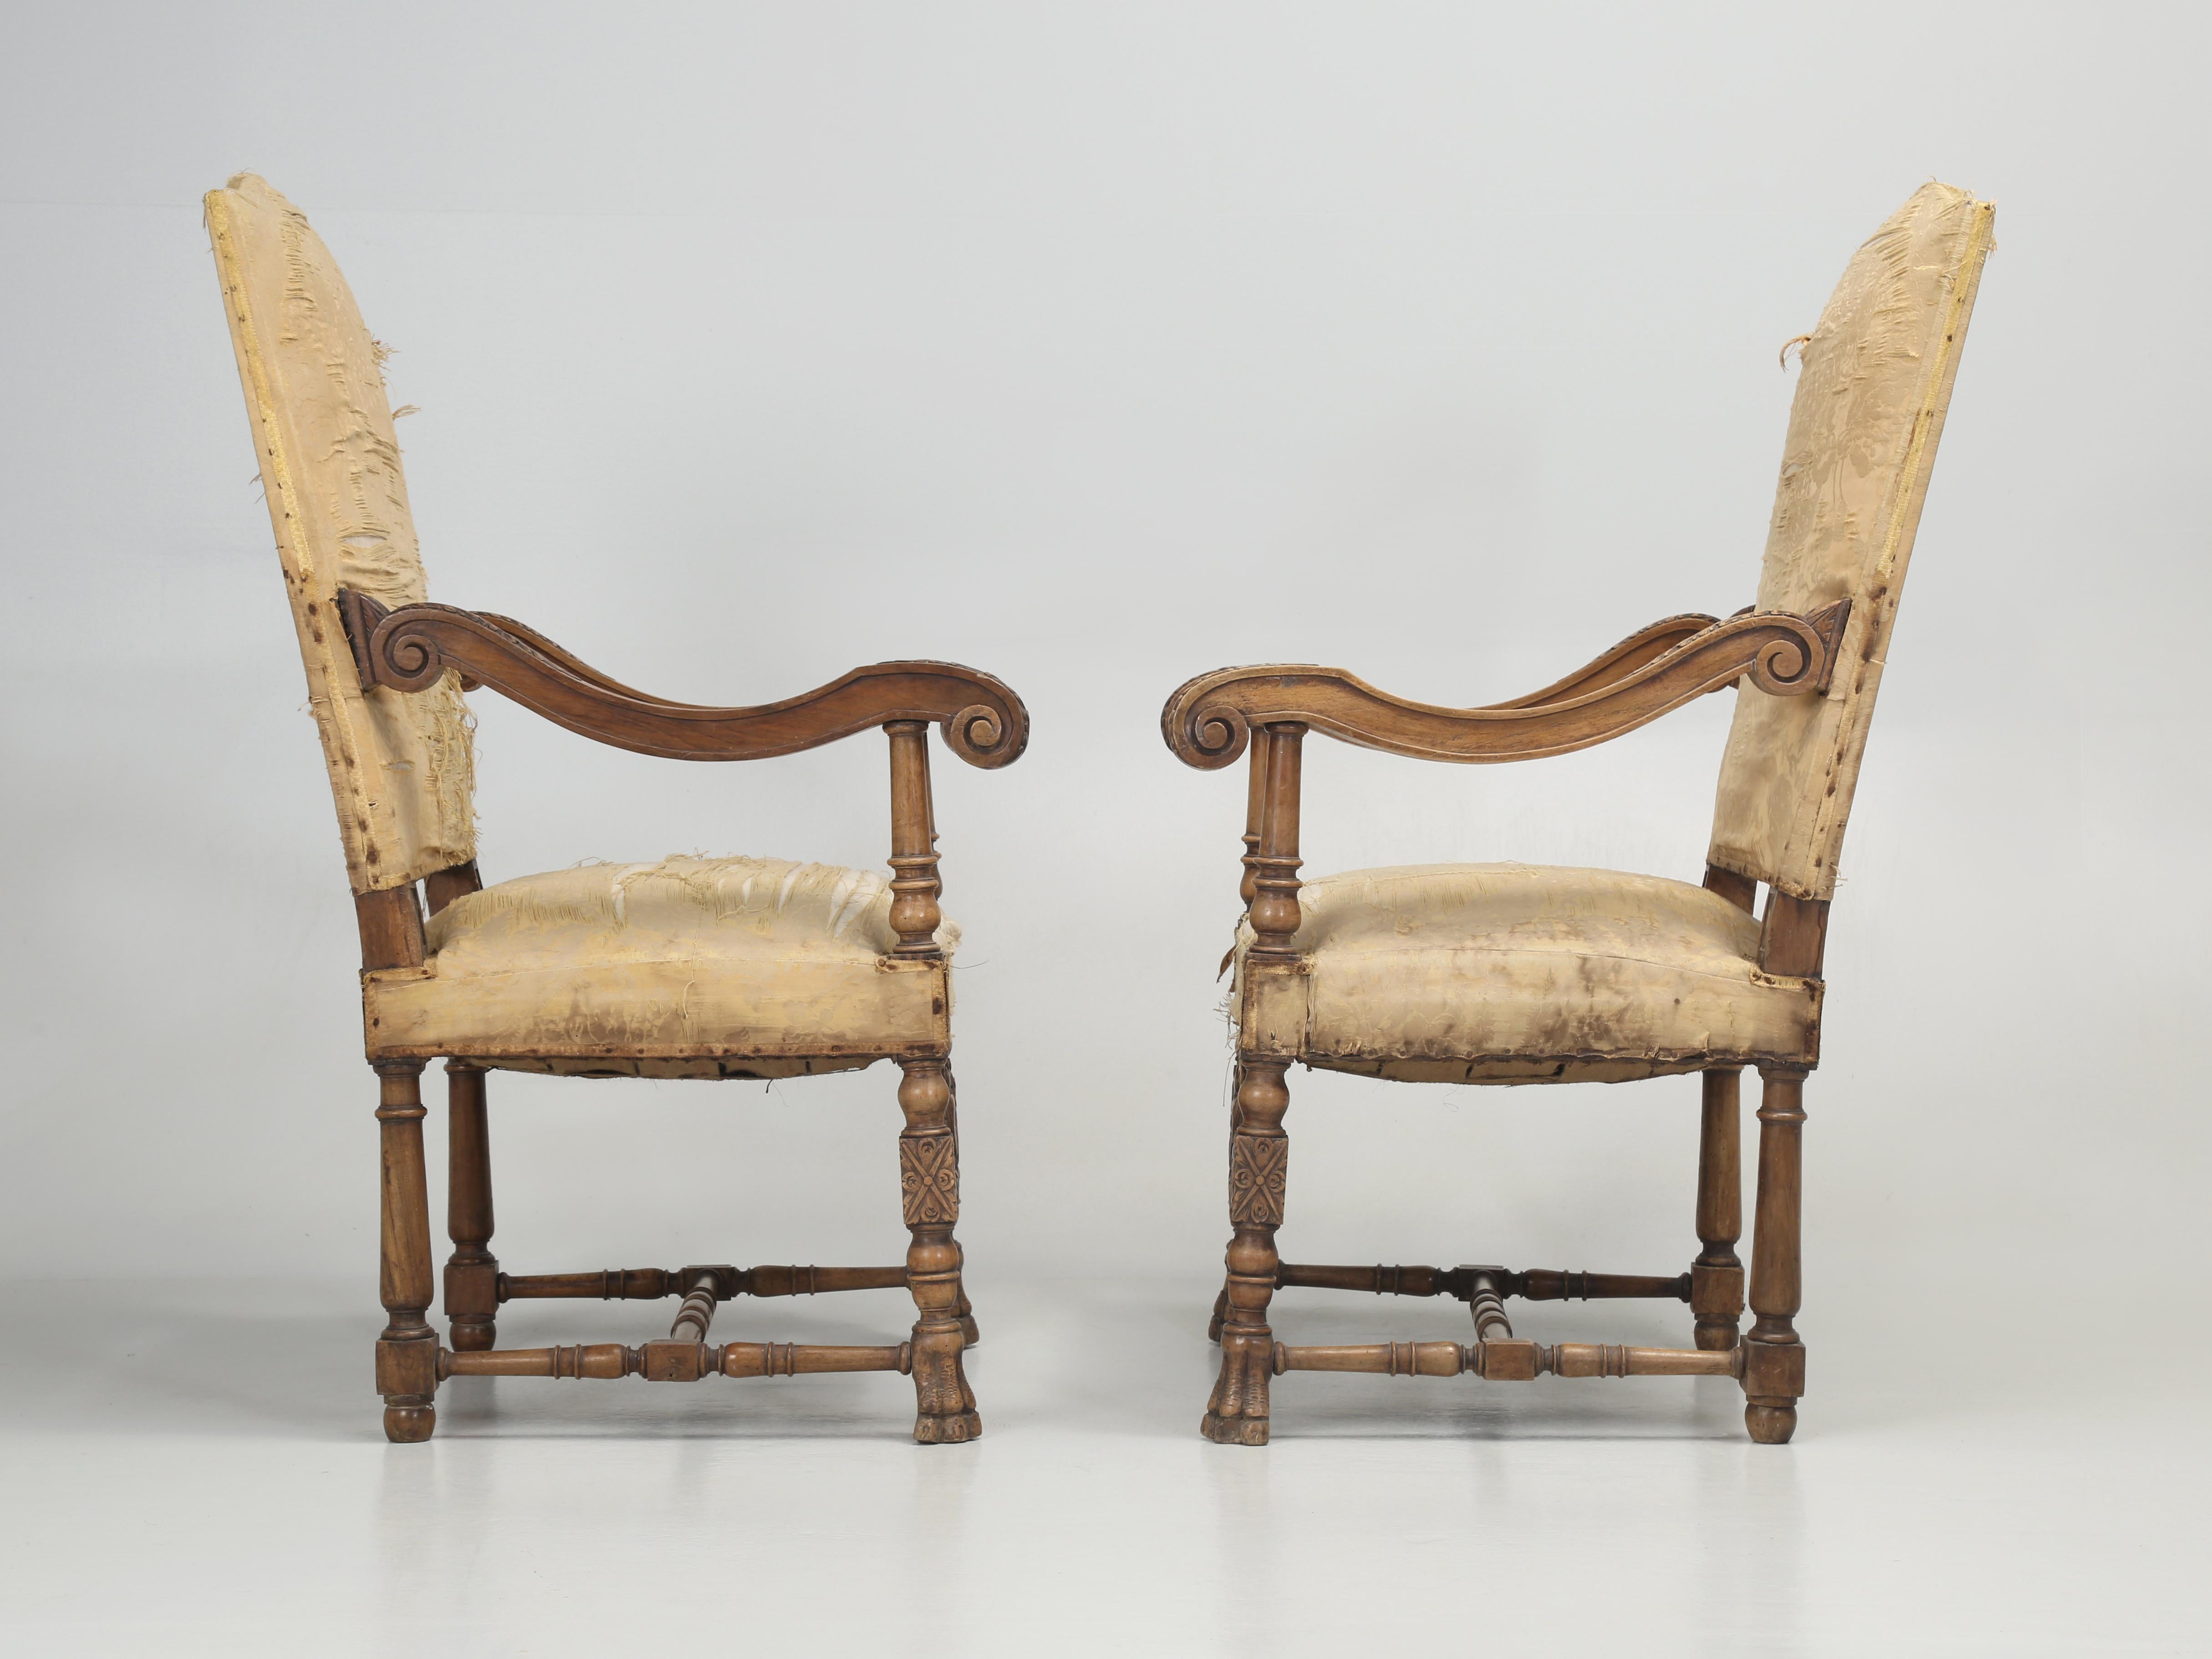 Antique Pair of Italian Armchairs Hand Carved Walnut Require Restoration, C1880s For Sale 11